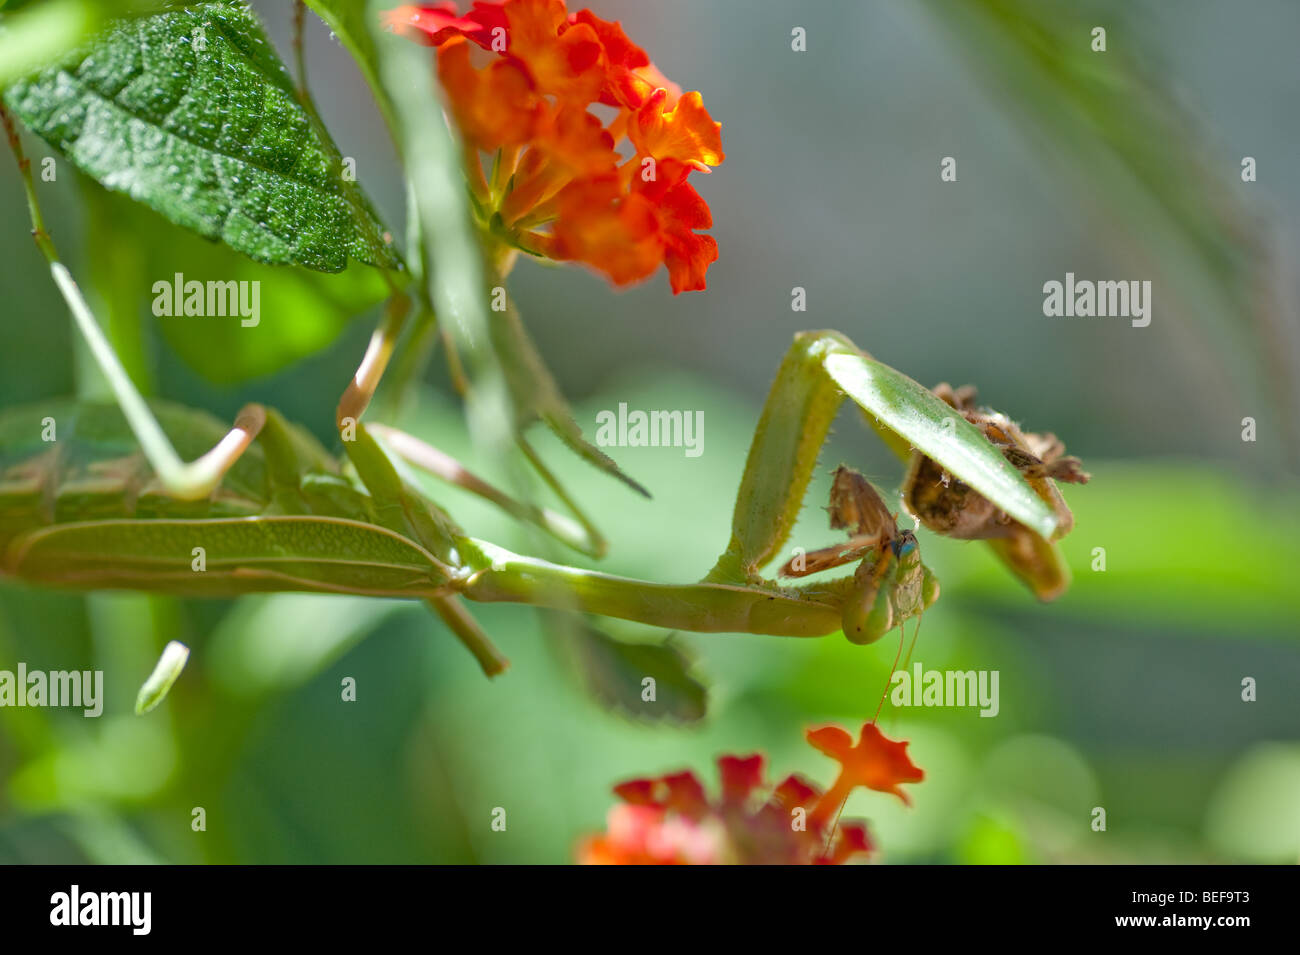 Large female Praying Mantis eating a butterfly Stock Photo